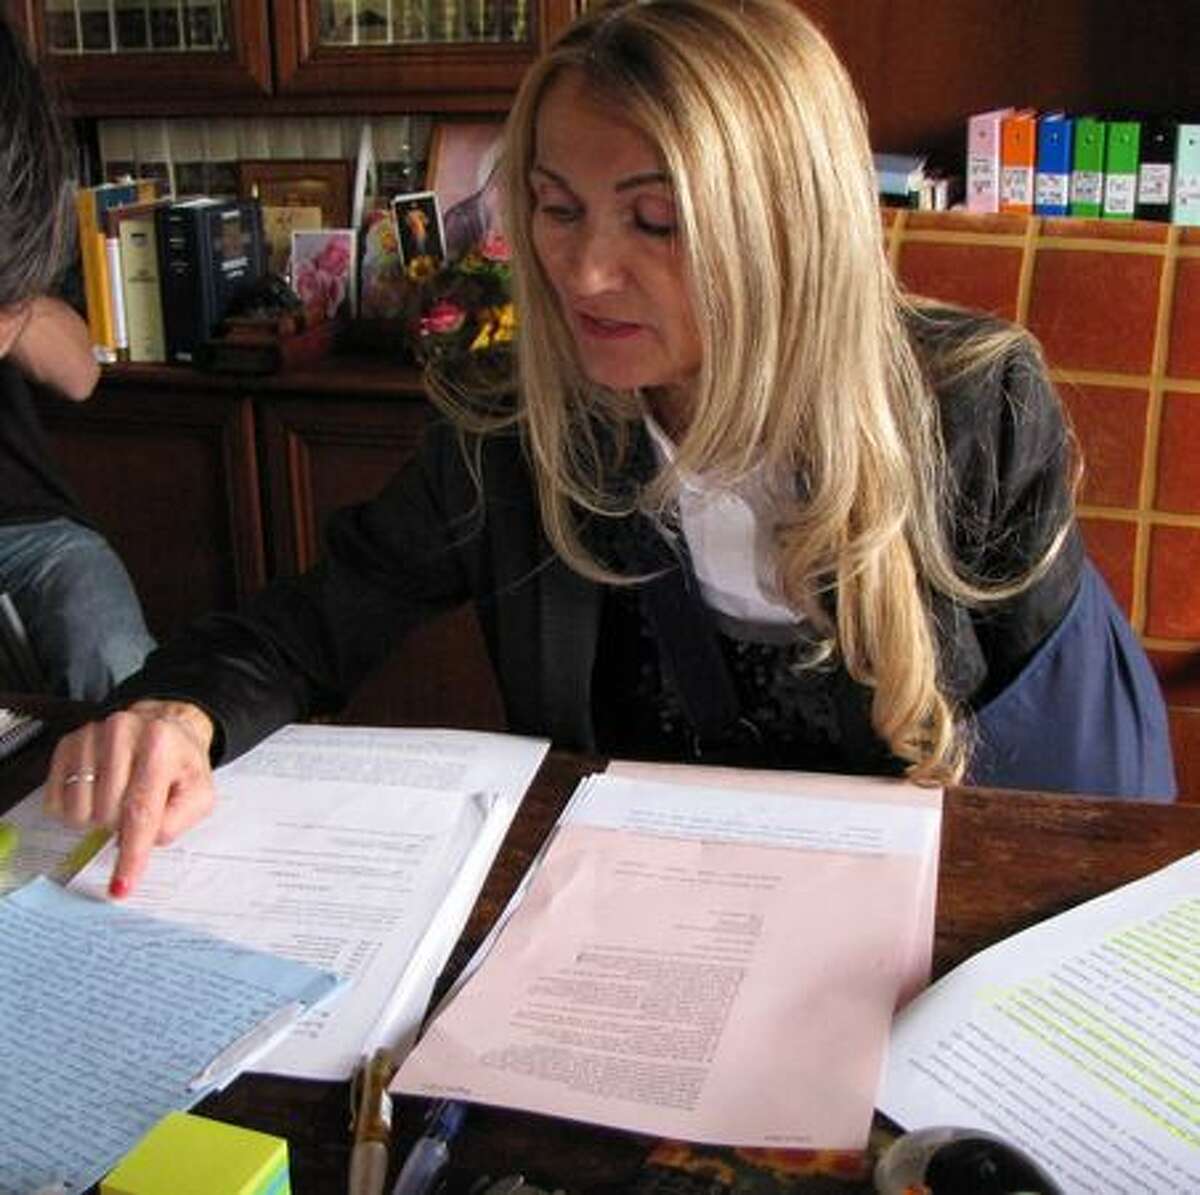 Italian lawyer Laura Ferraboschi reviews a letter from a convicted child killer. Amanda Knox's lawyers hopep the letter could help to set her free. (Photo by Andrea Vogt/special to seattlepi.com)